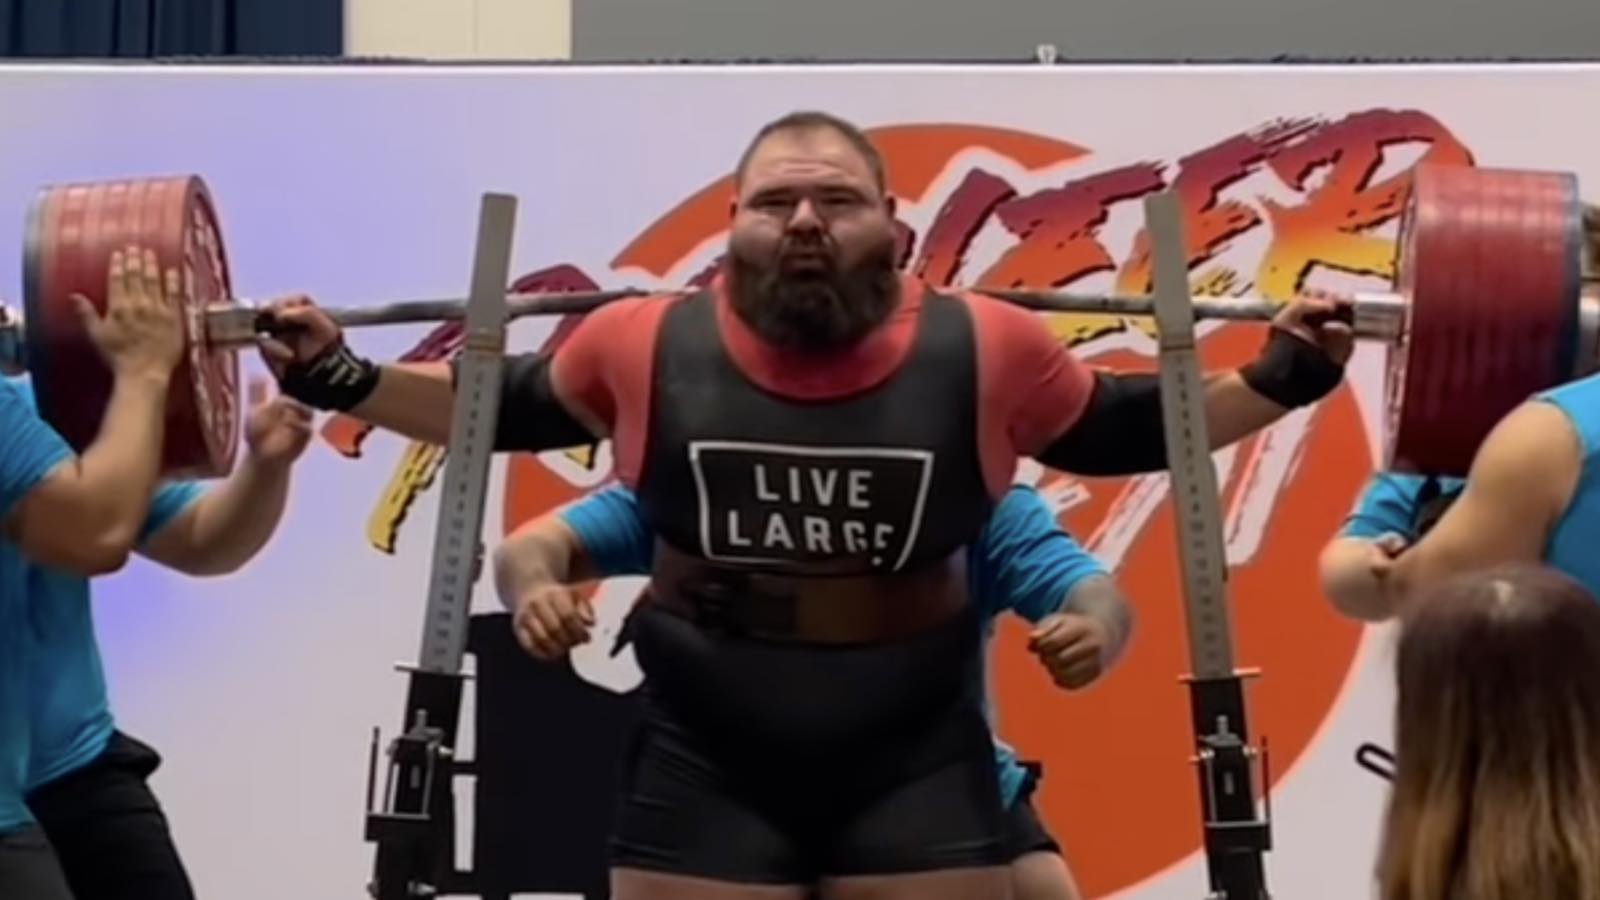 daniel-bell-reveals-injury-suffered-during-425-kilogram-(937-pound)-squat-–-breaking-muscle